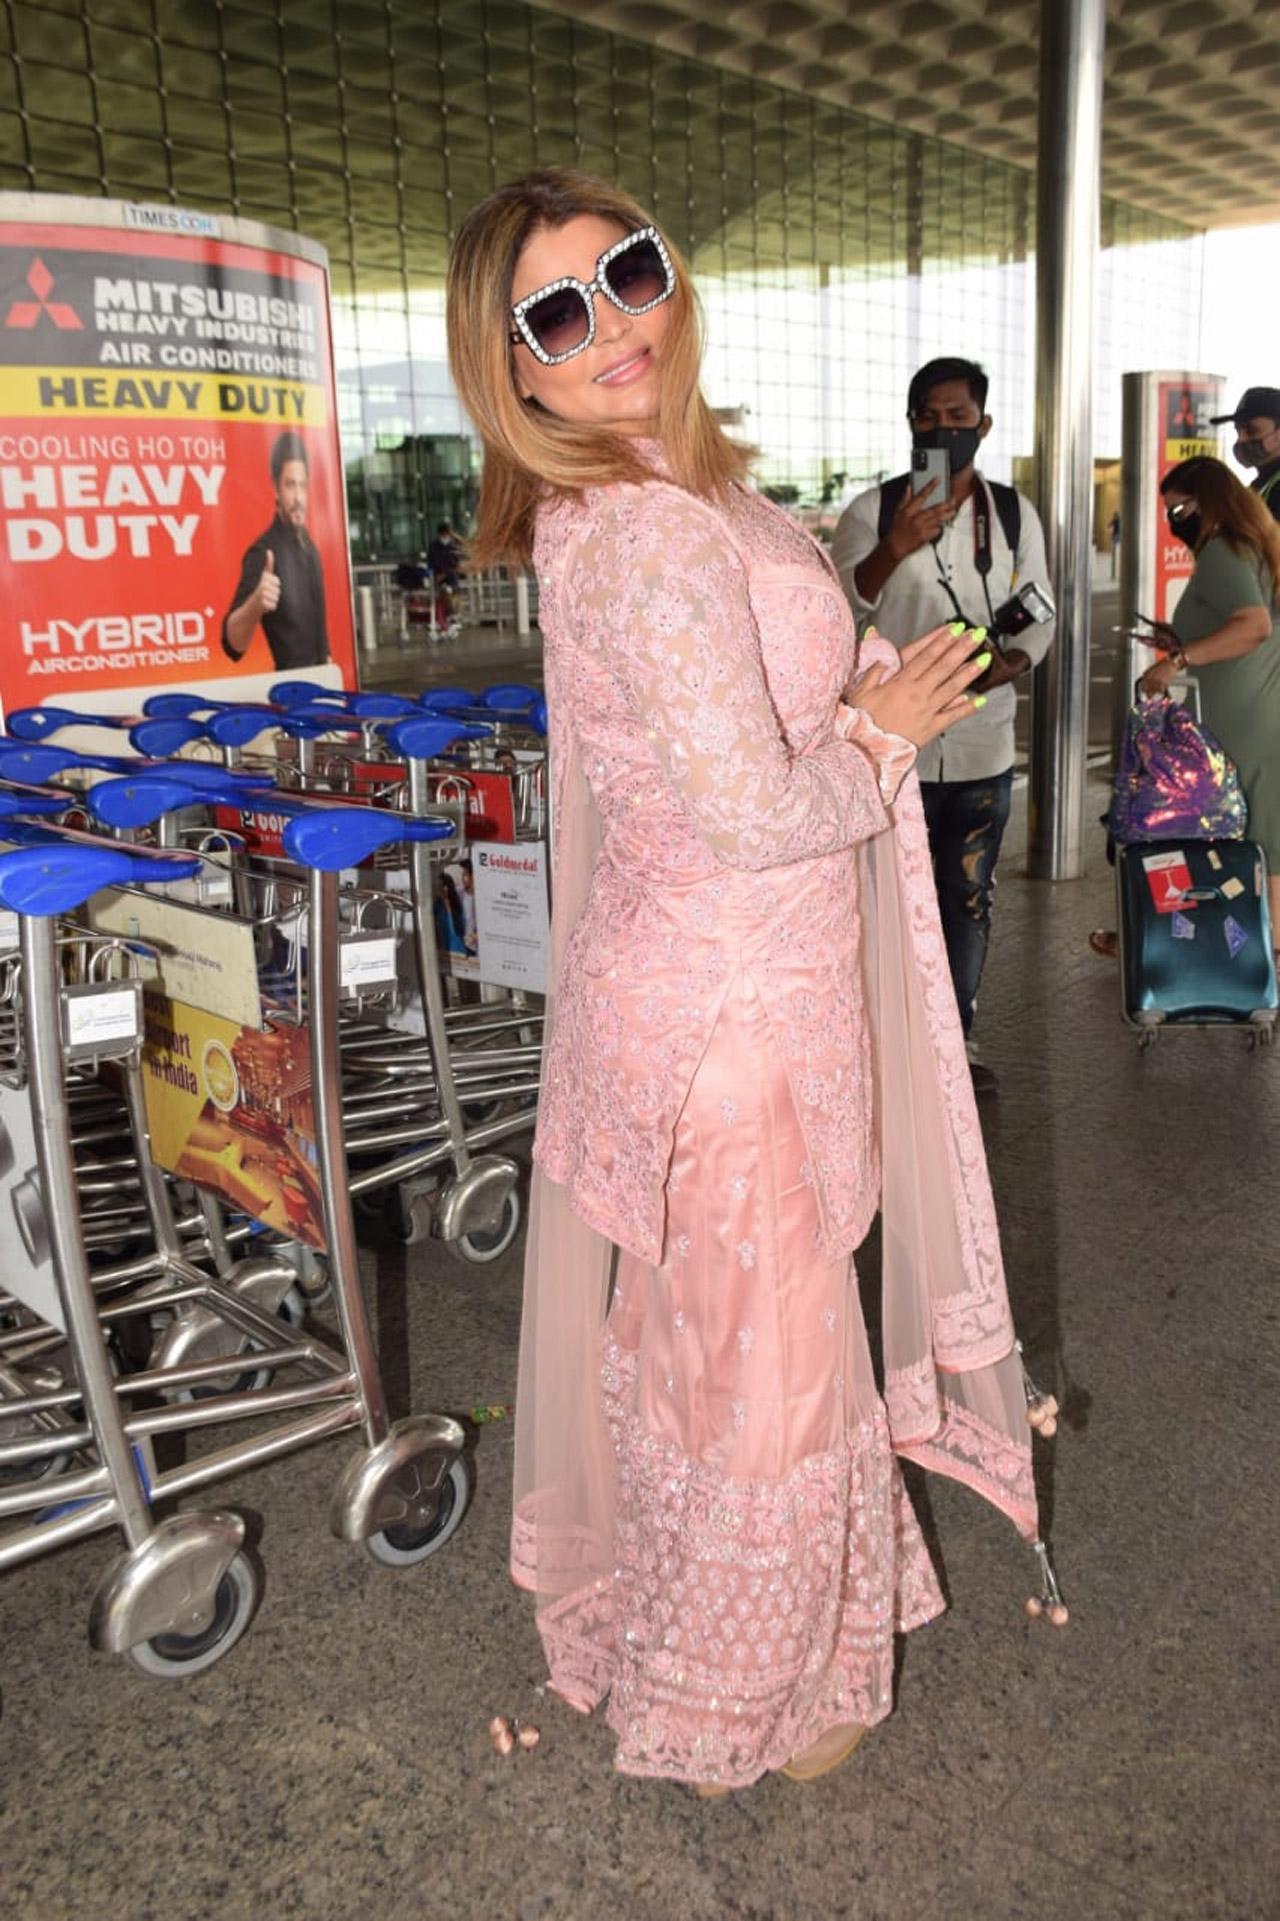 Rakhi Sawant happily posed for the paparazzi, before heading to the entrance gate of the airport. The actress, apparently, jetted off to Goa for a vacation.